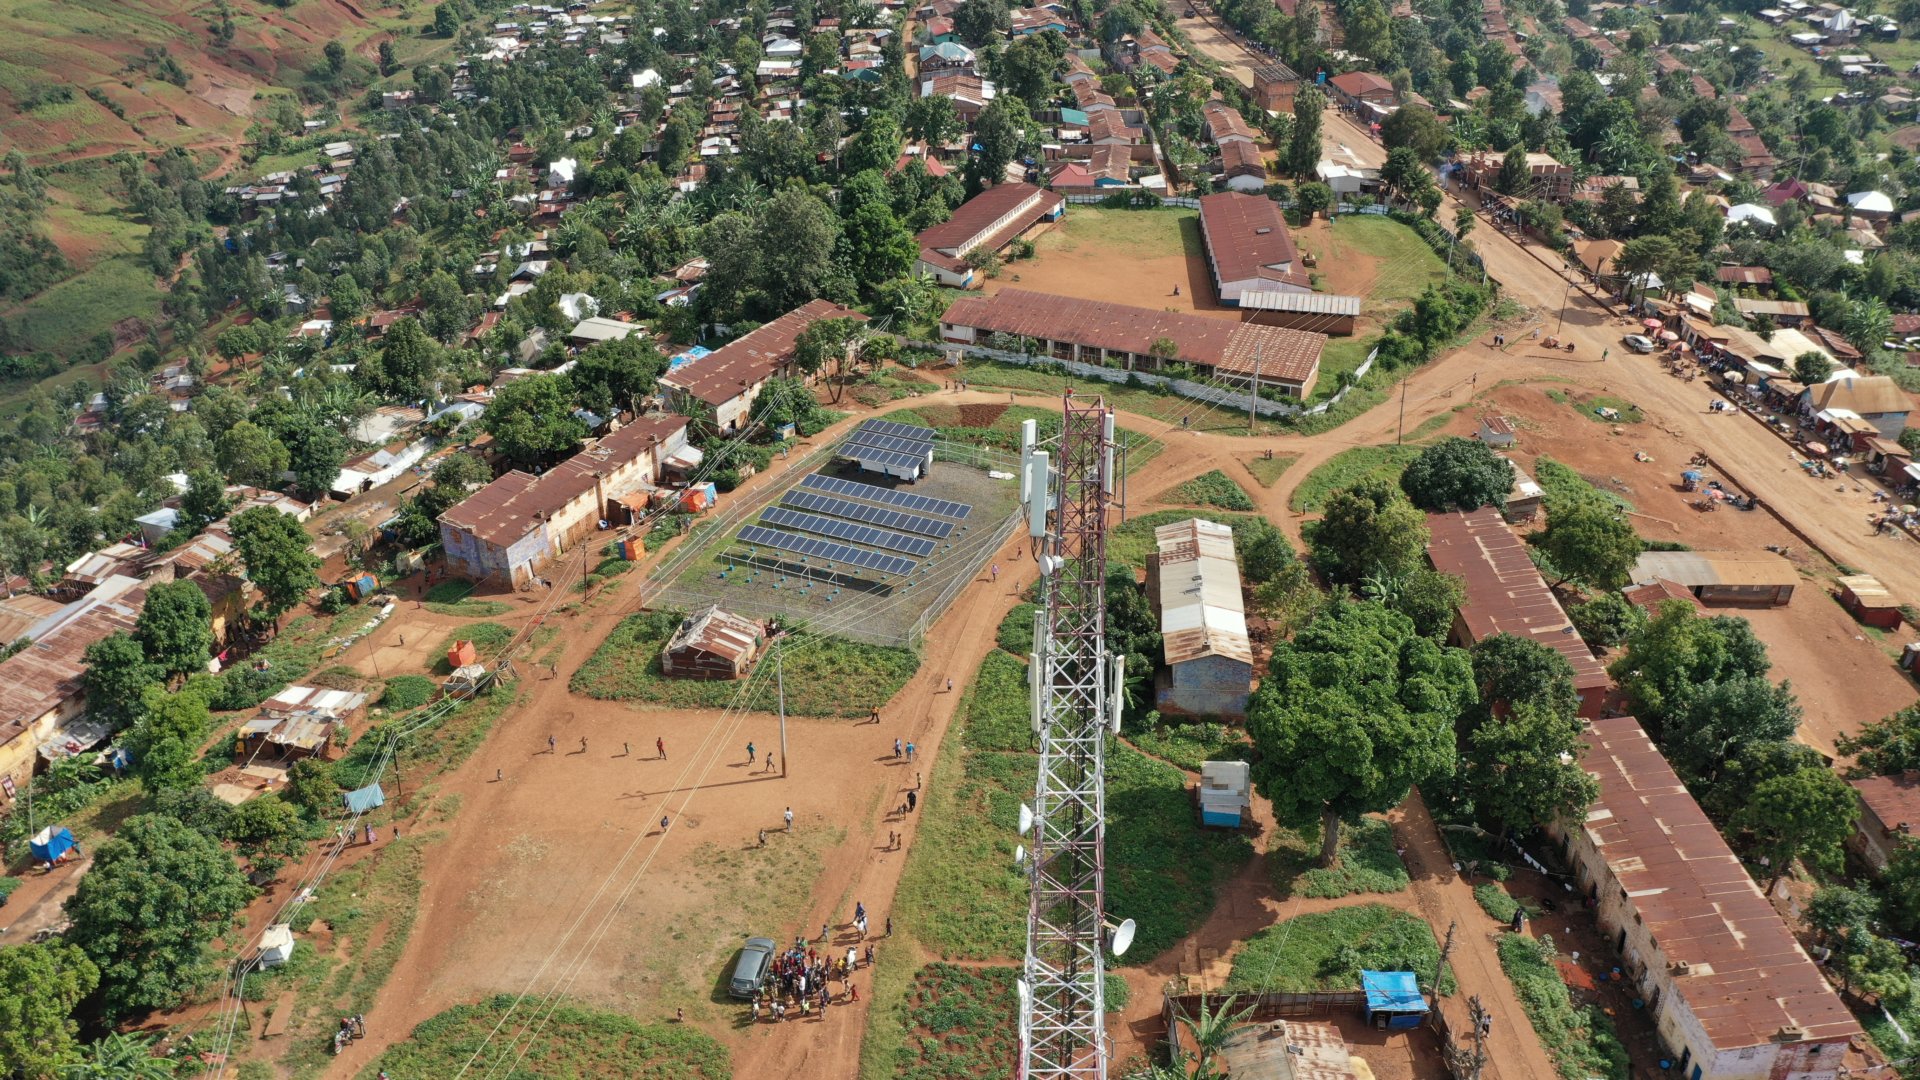 Bboxx partners with major telecommunications operator Orange to connect 150,000 people in DRC to an innovative mini-grid model